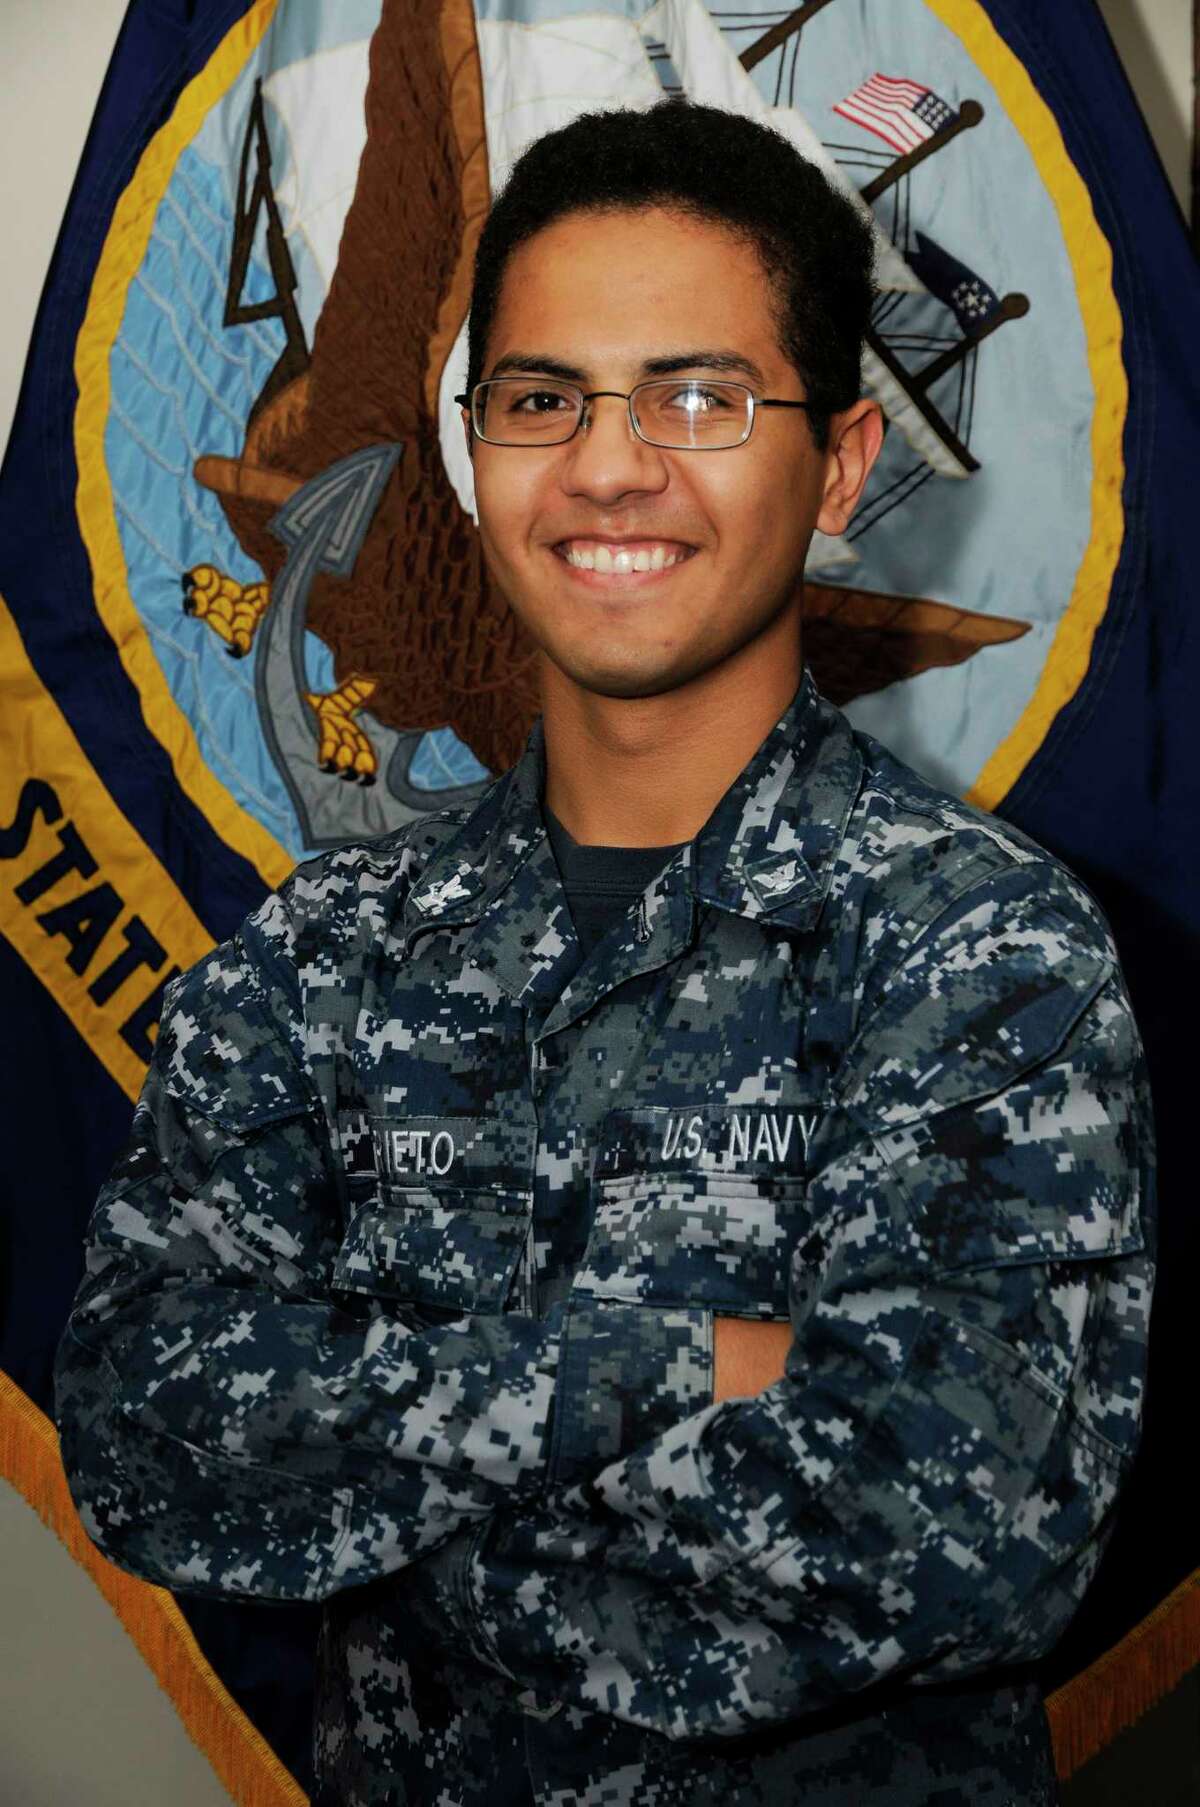 Petty Officer 3rd Class Daniel Prieto, a culinary specialist, is responsible for scheduling events and inspections for submarines at Kings Bay, Ga.